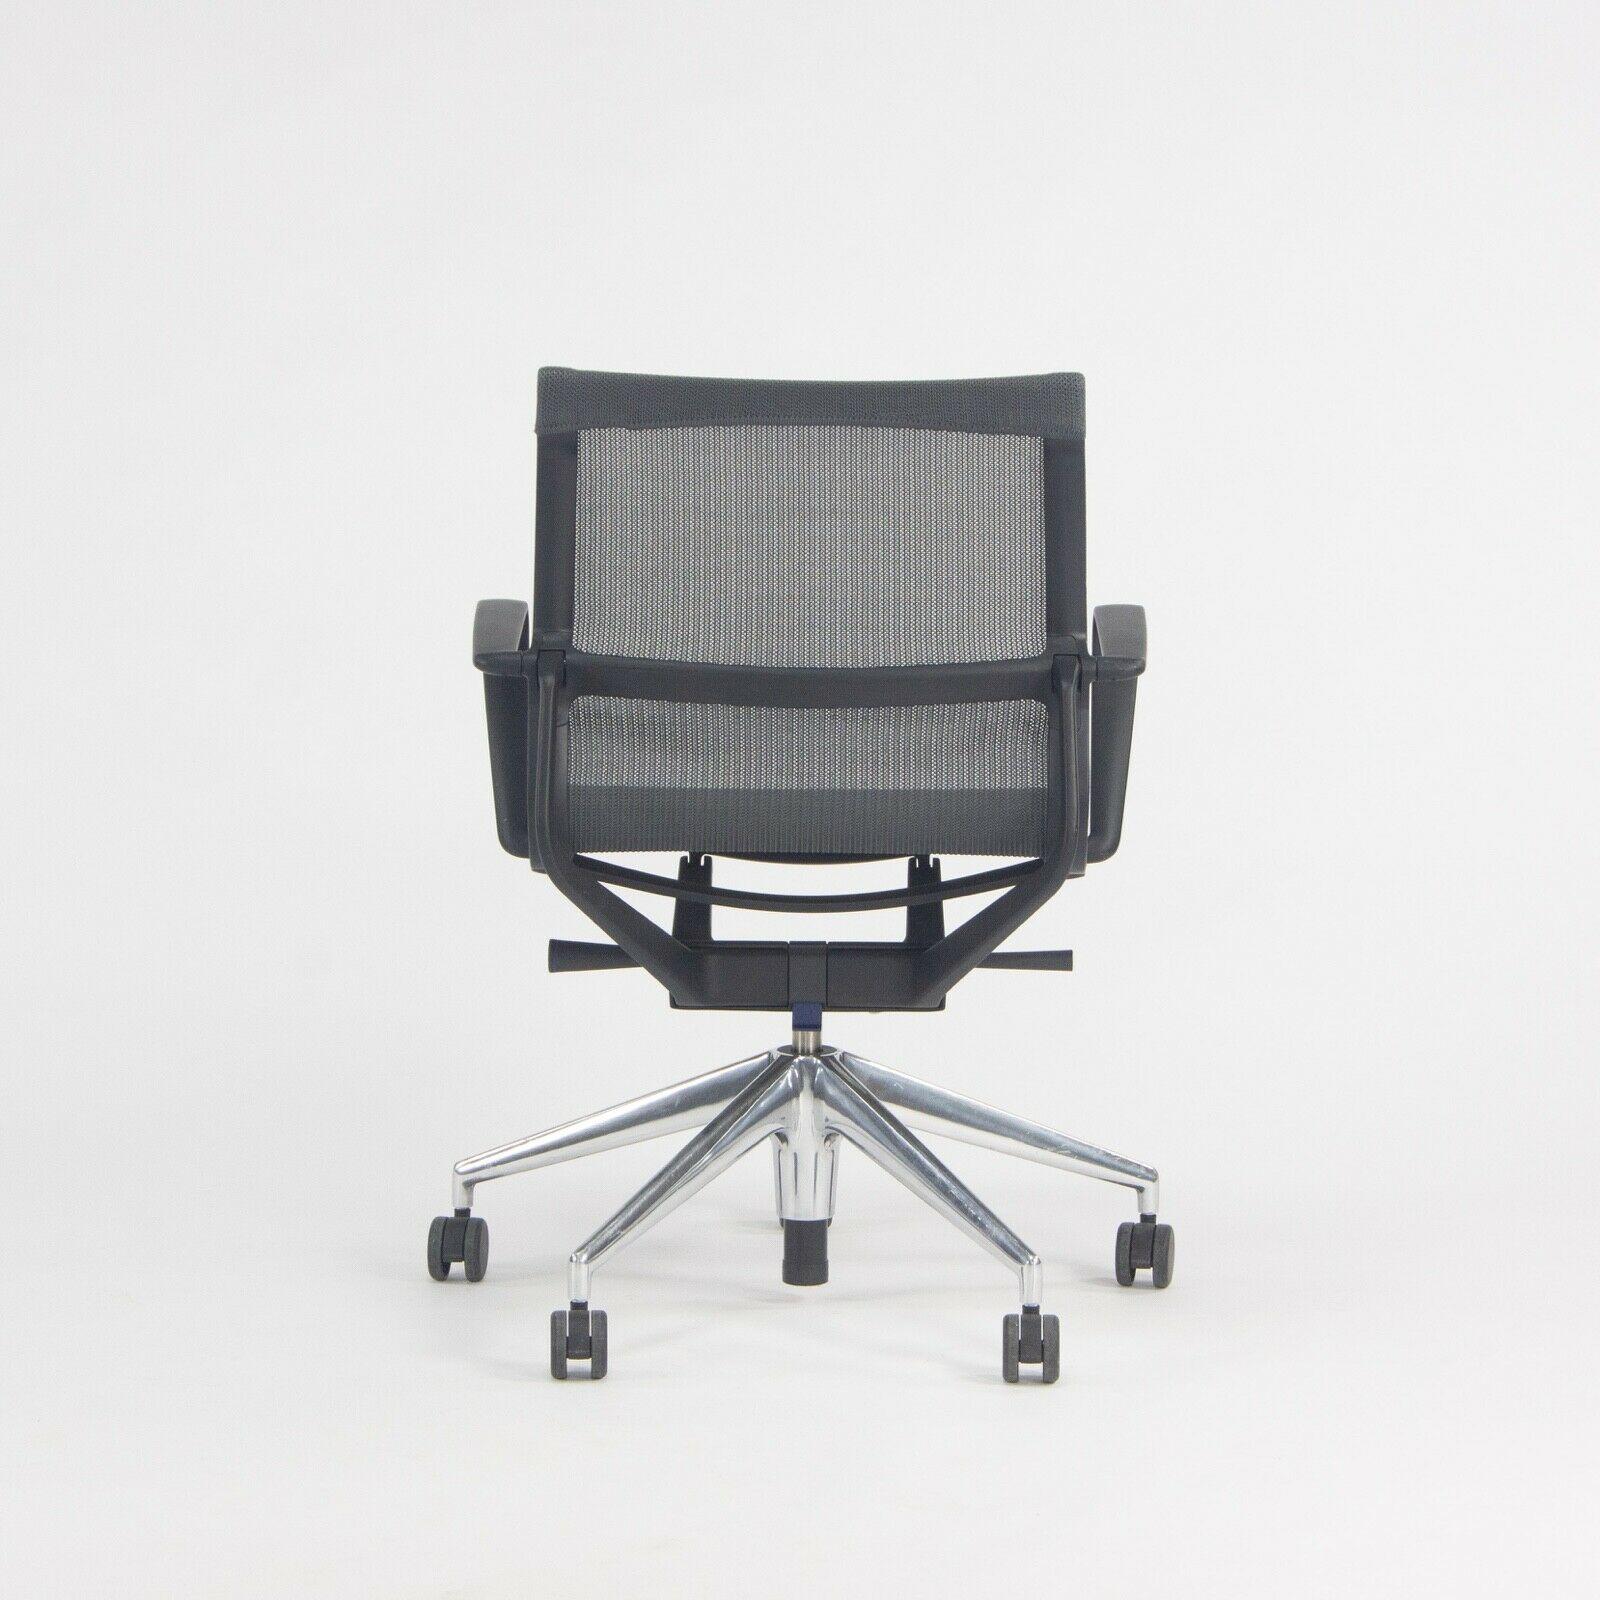 Contemporary 2018 Vitra Physix Rolling Desk Chair by Alberta Meda Gray Mesh Sets Available For Sale